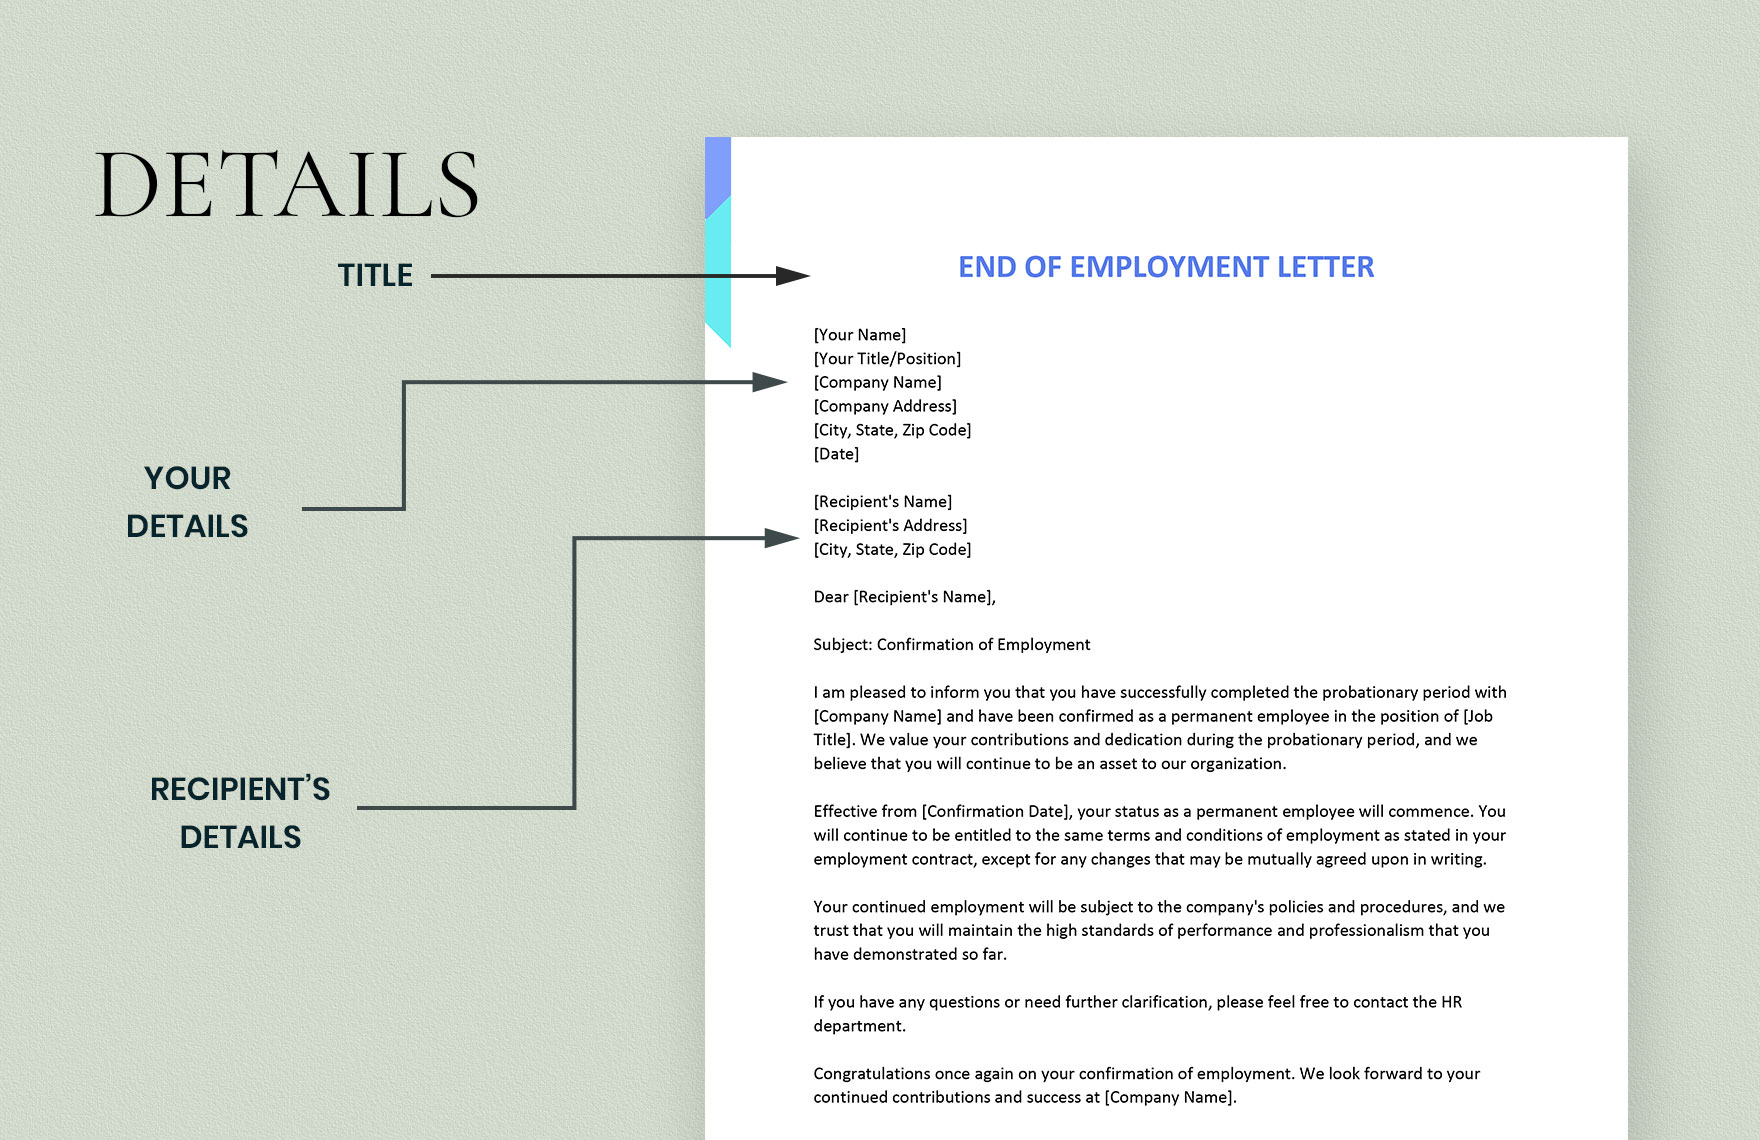 End of Employment Letter